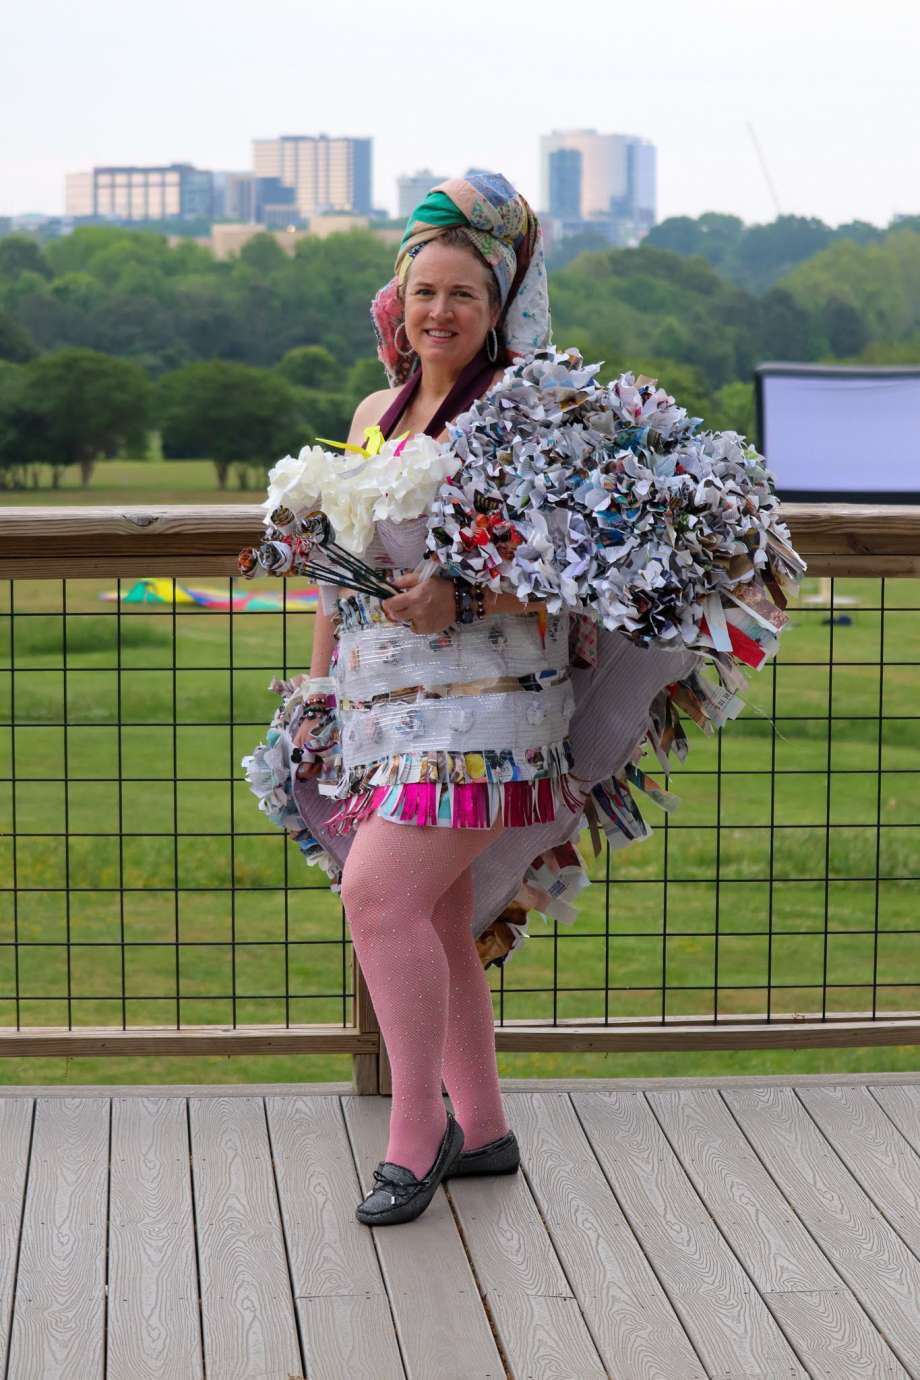 Woman in outfit made of trash stands in front of Raleigh skyline